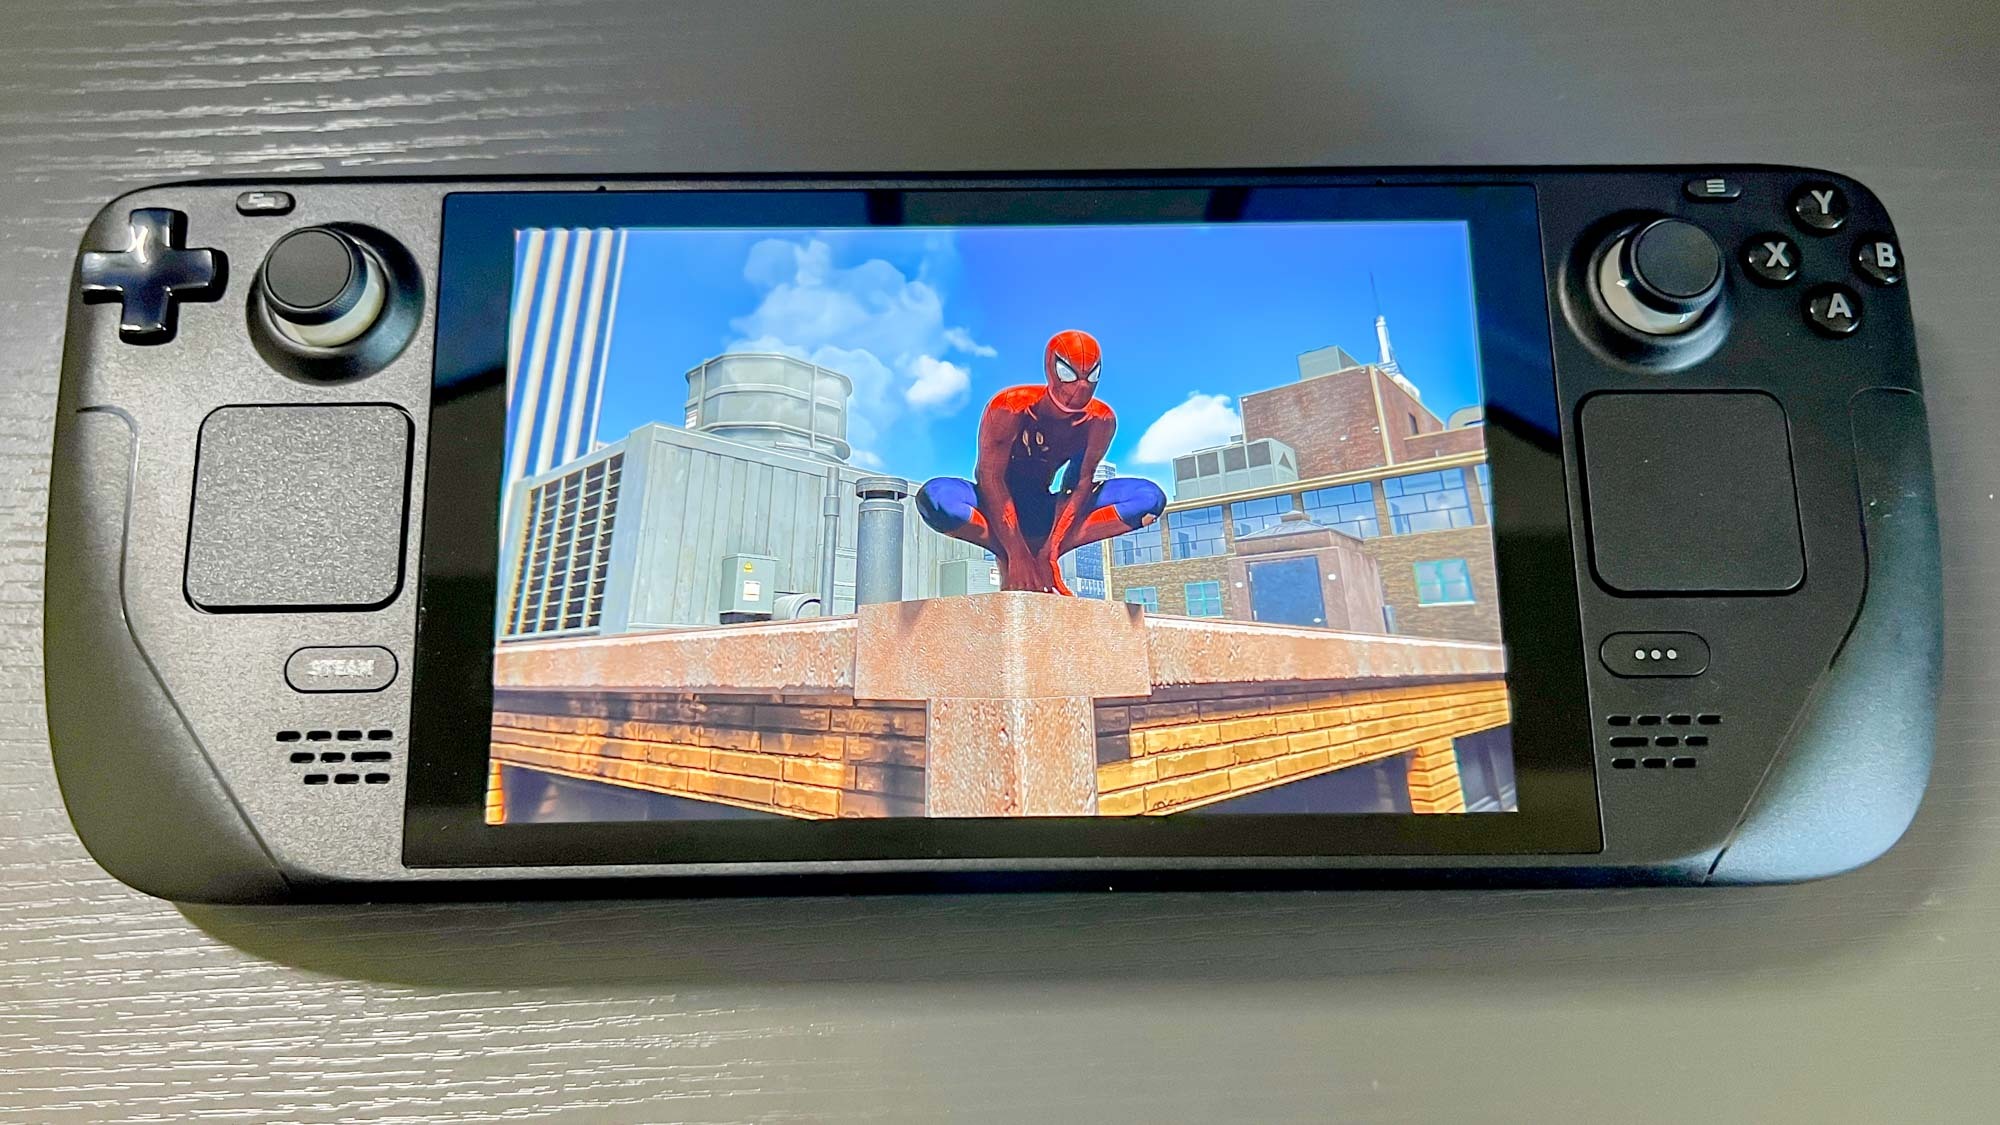 Spider-Man Remastered on PC: Keyboard and Mouse vs Controller